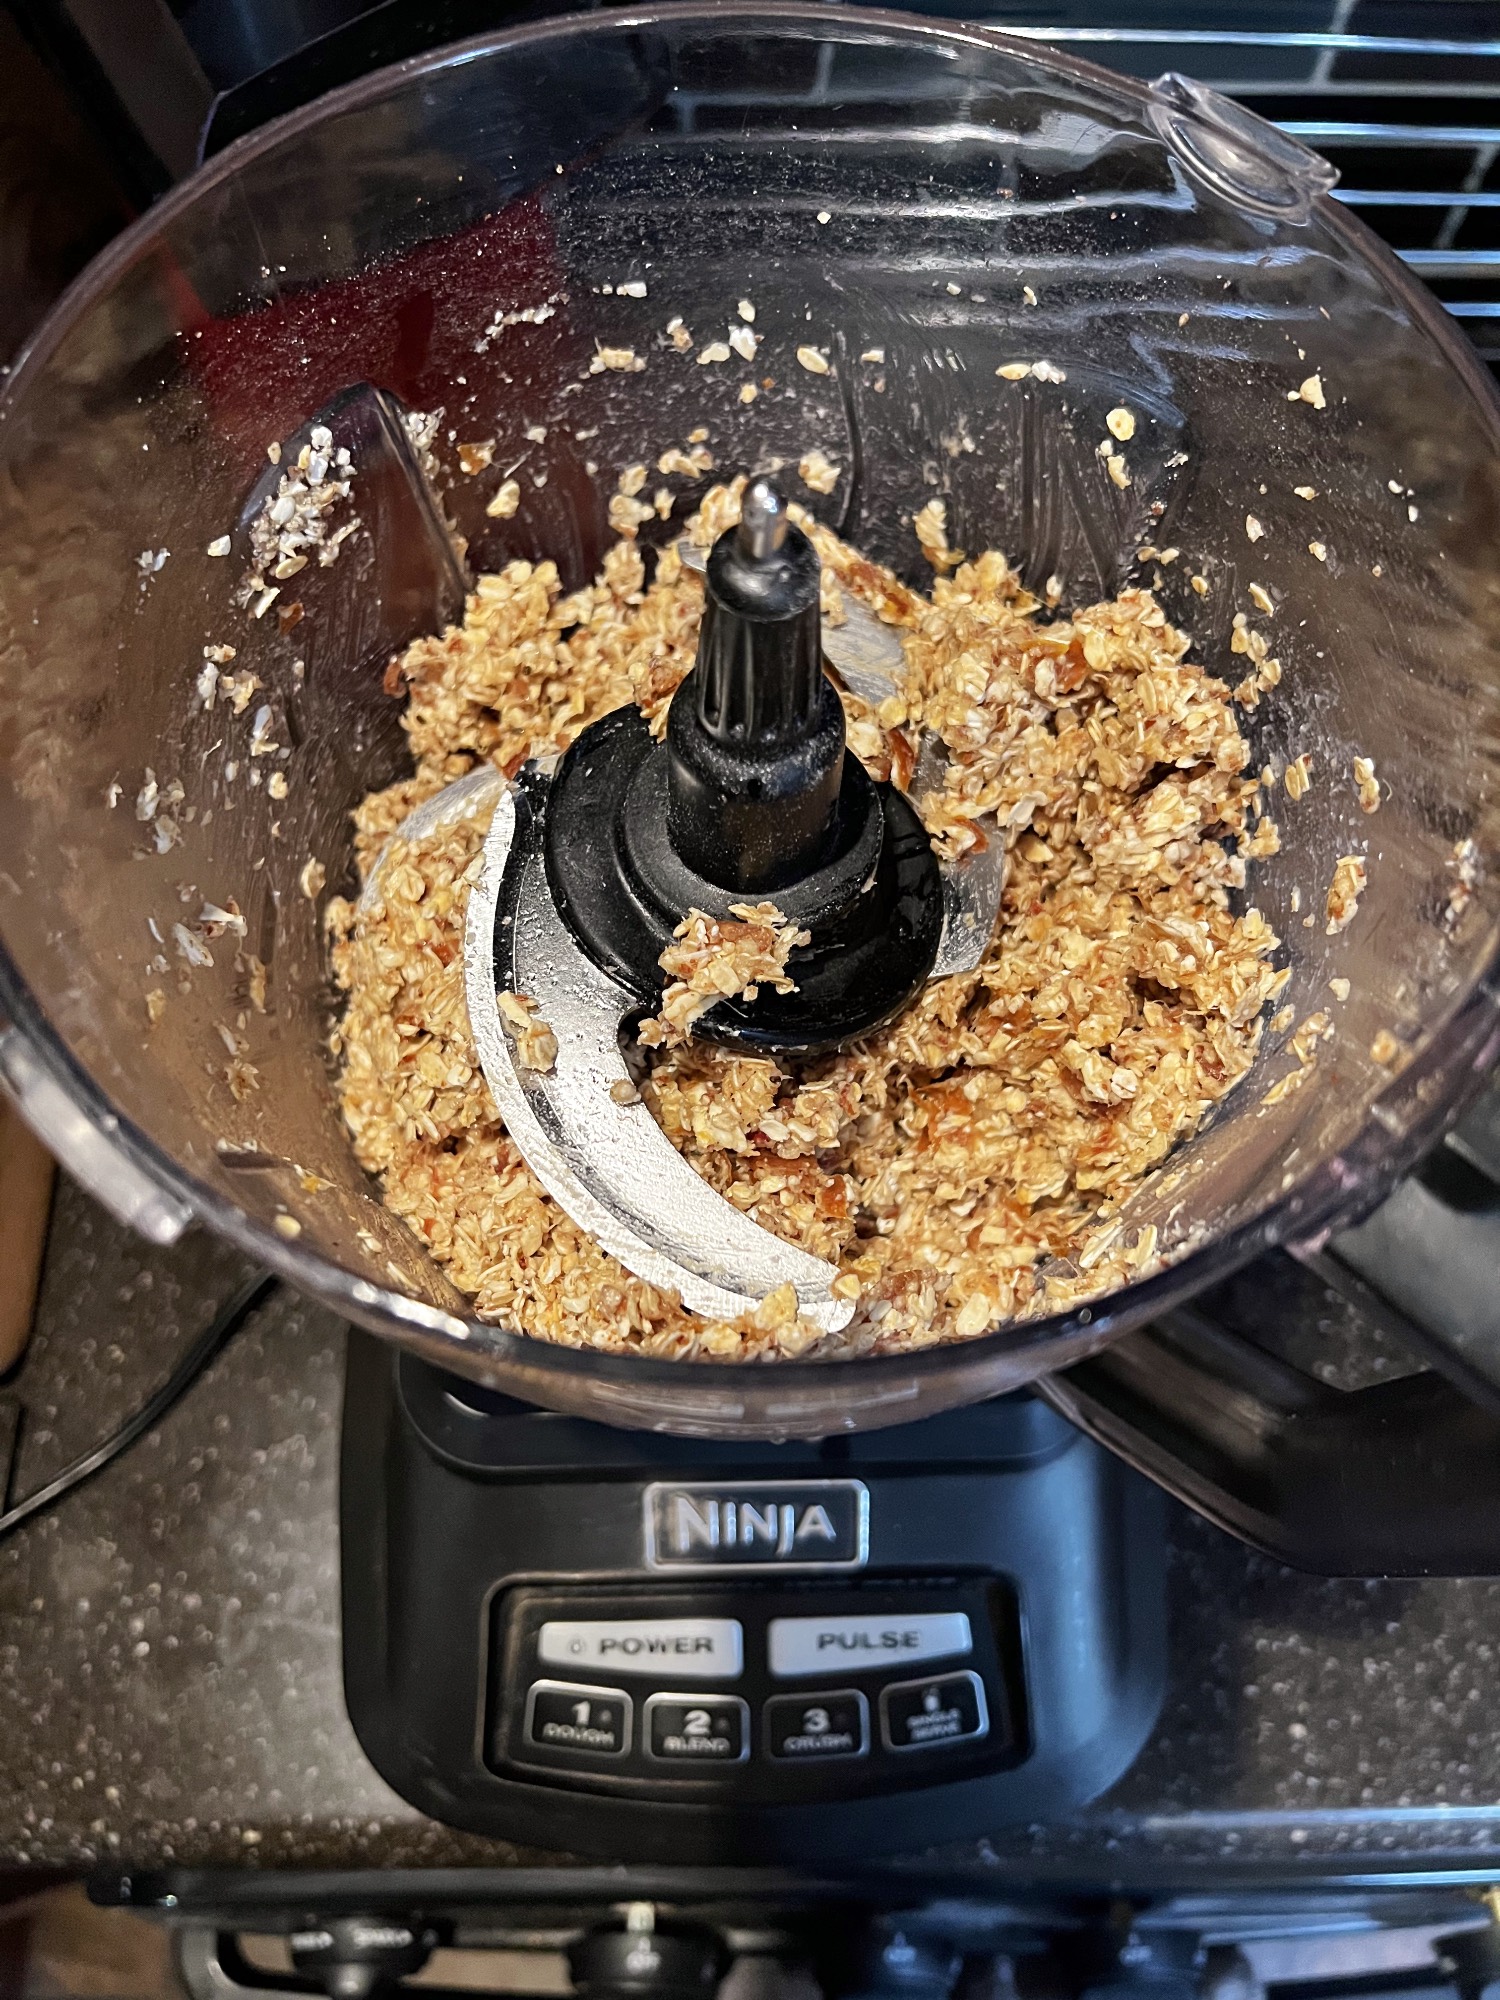 vegan glutenfree crust ingredients in a food processor bowl after processing.